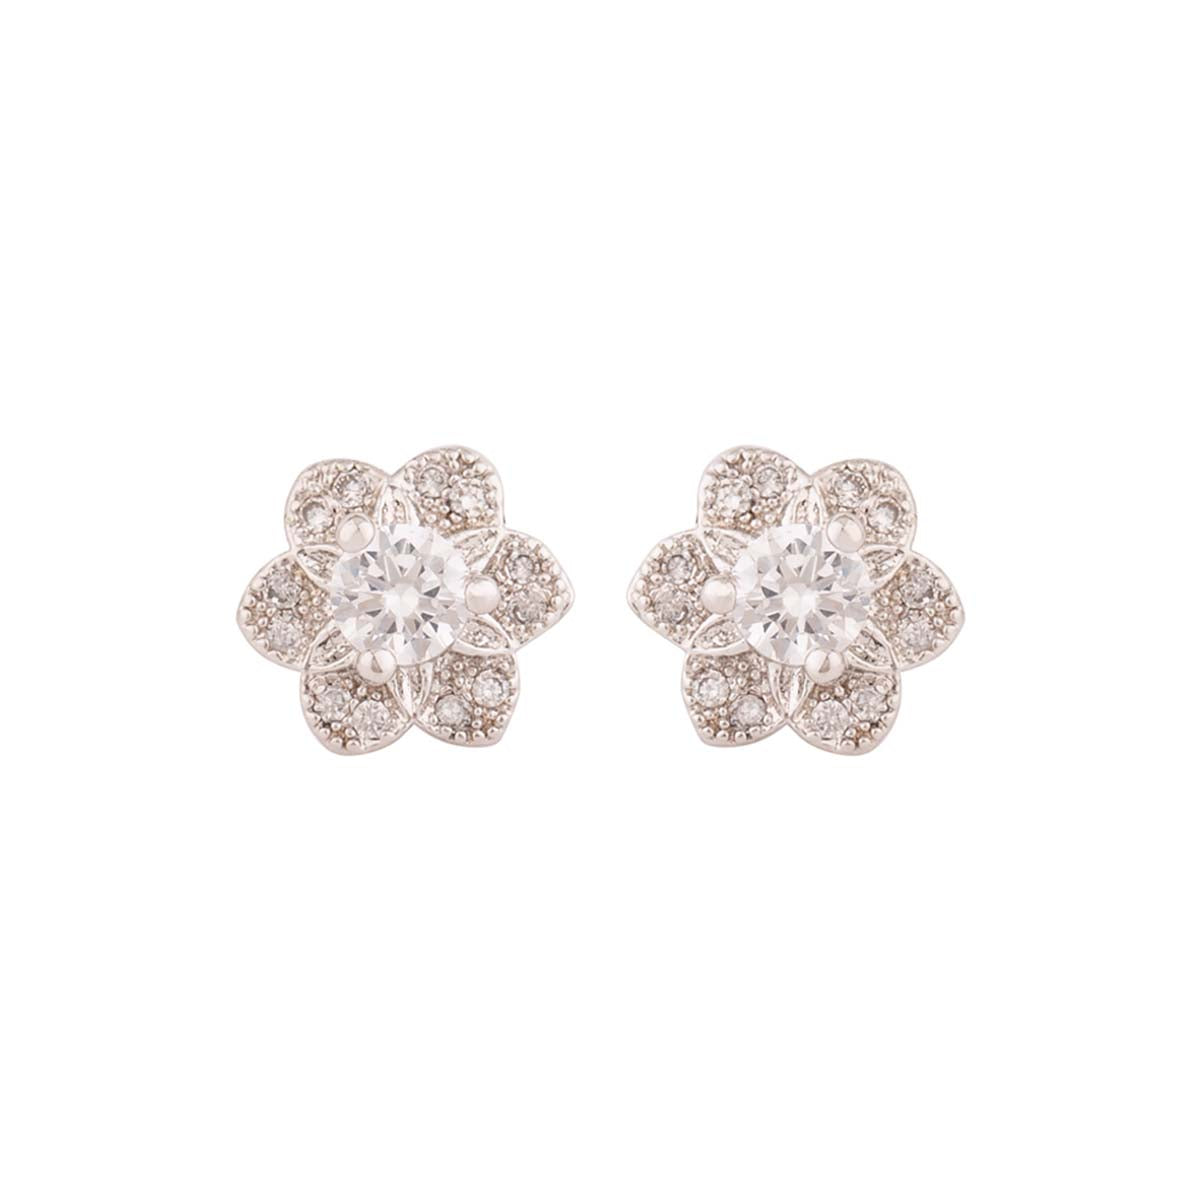 Tiny Floral Stud Earrings